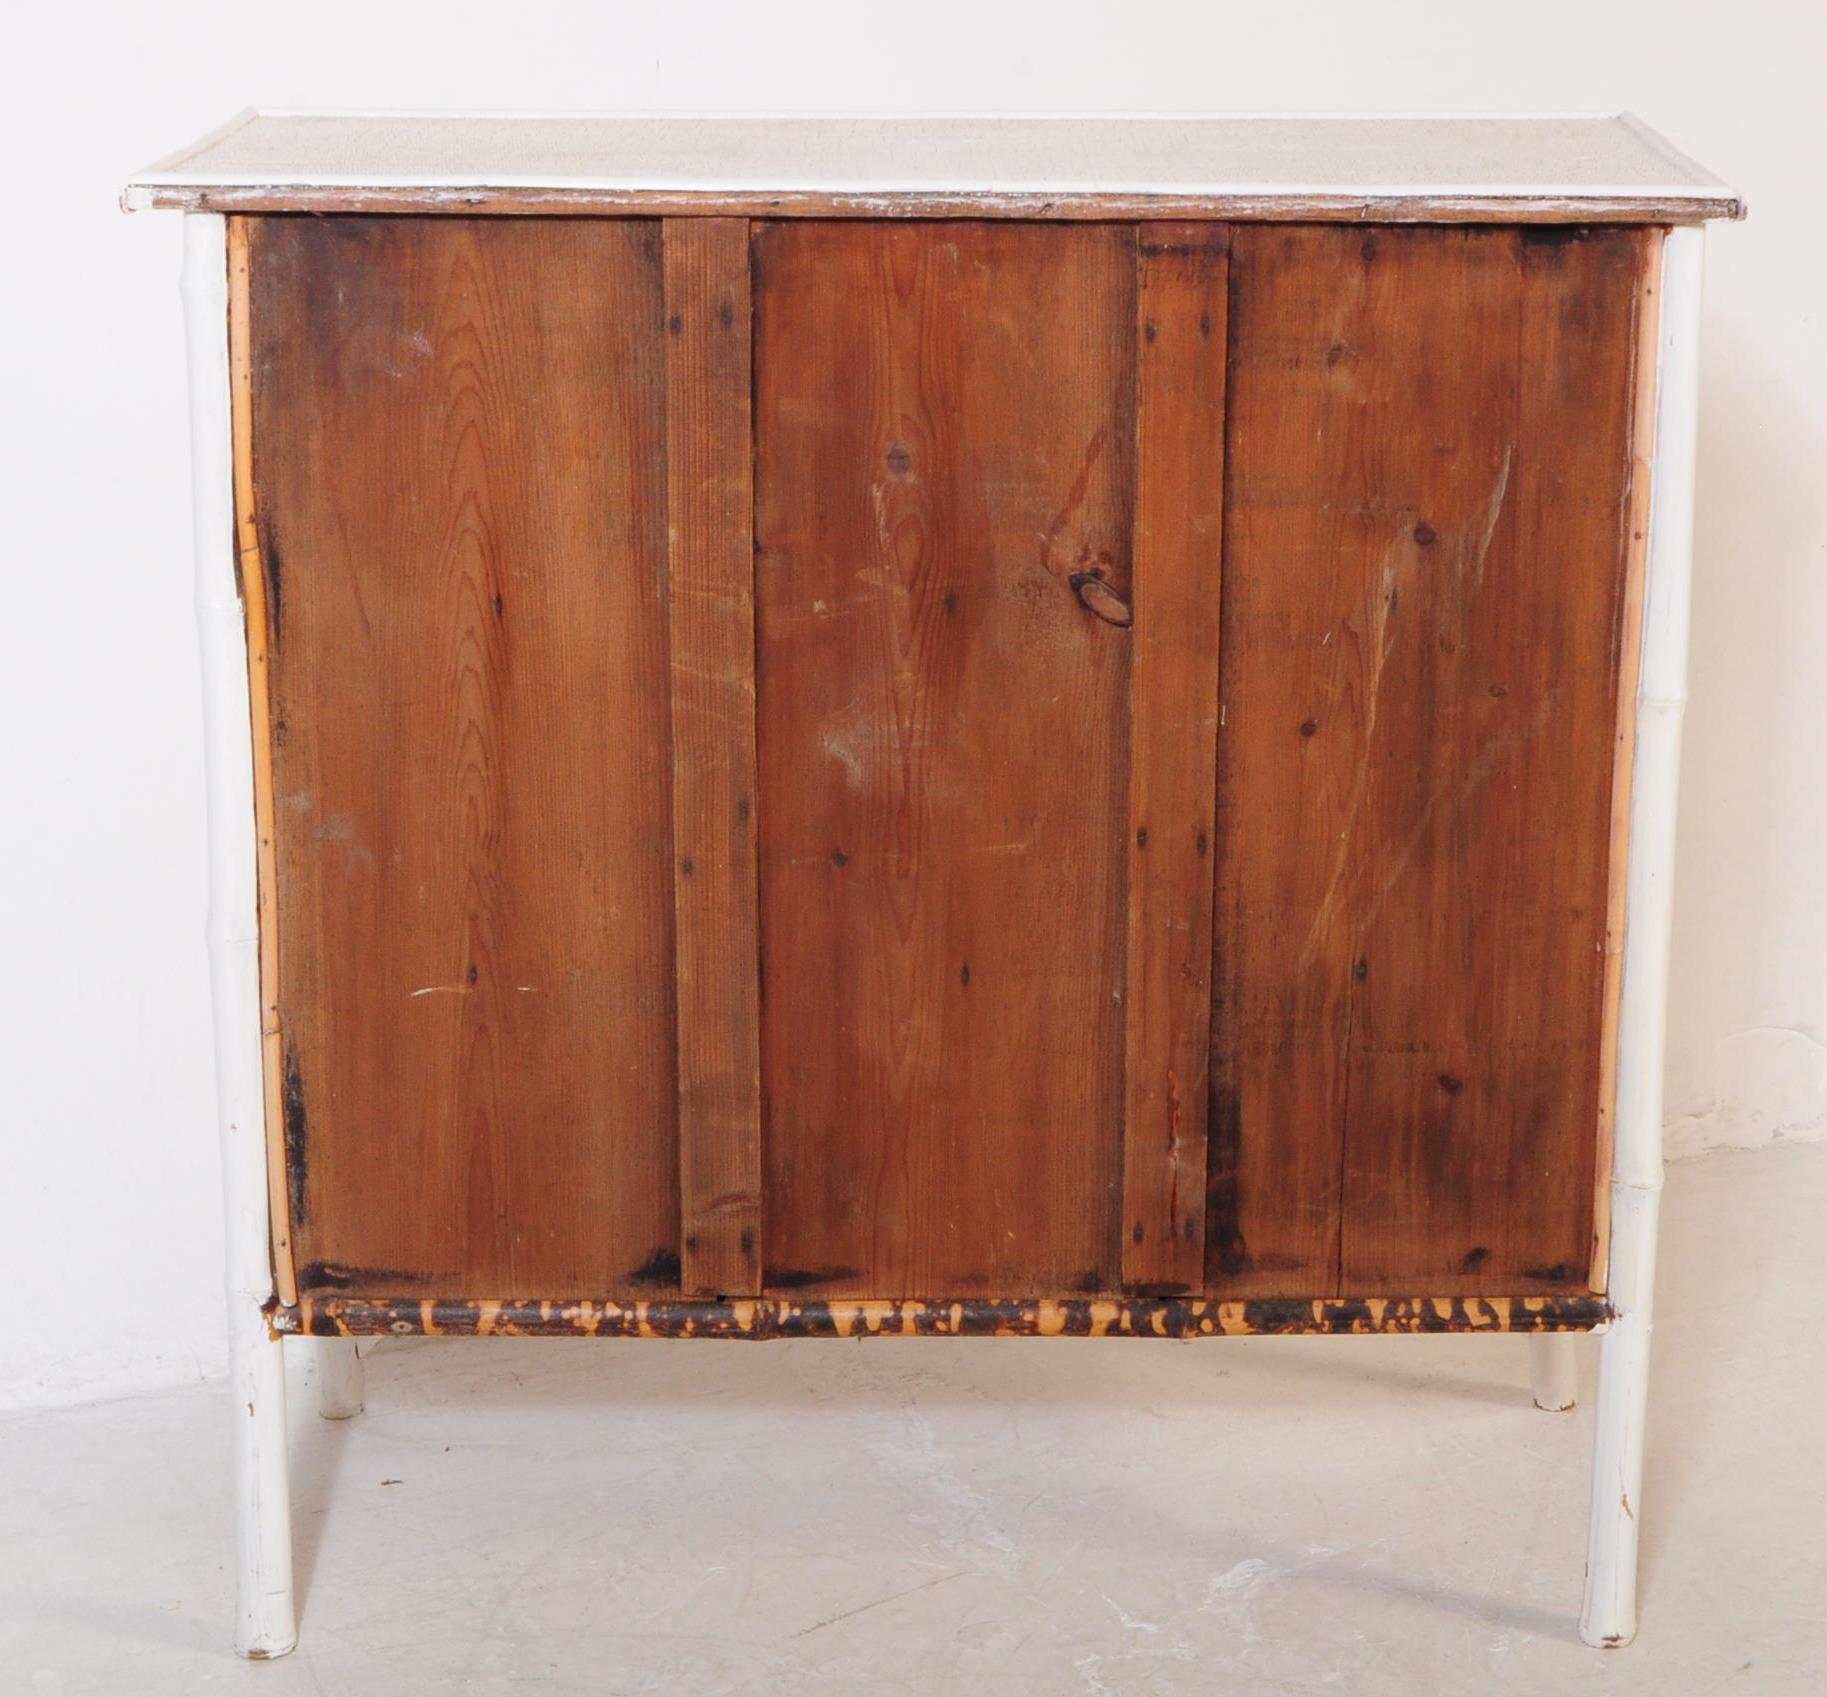 EARLY 20TH CENTURY BAMBOO & PINE CUPBOARD - Image 7 of 7